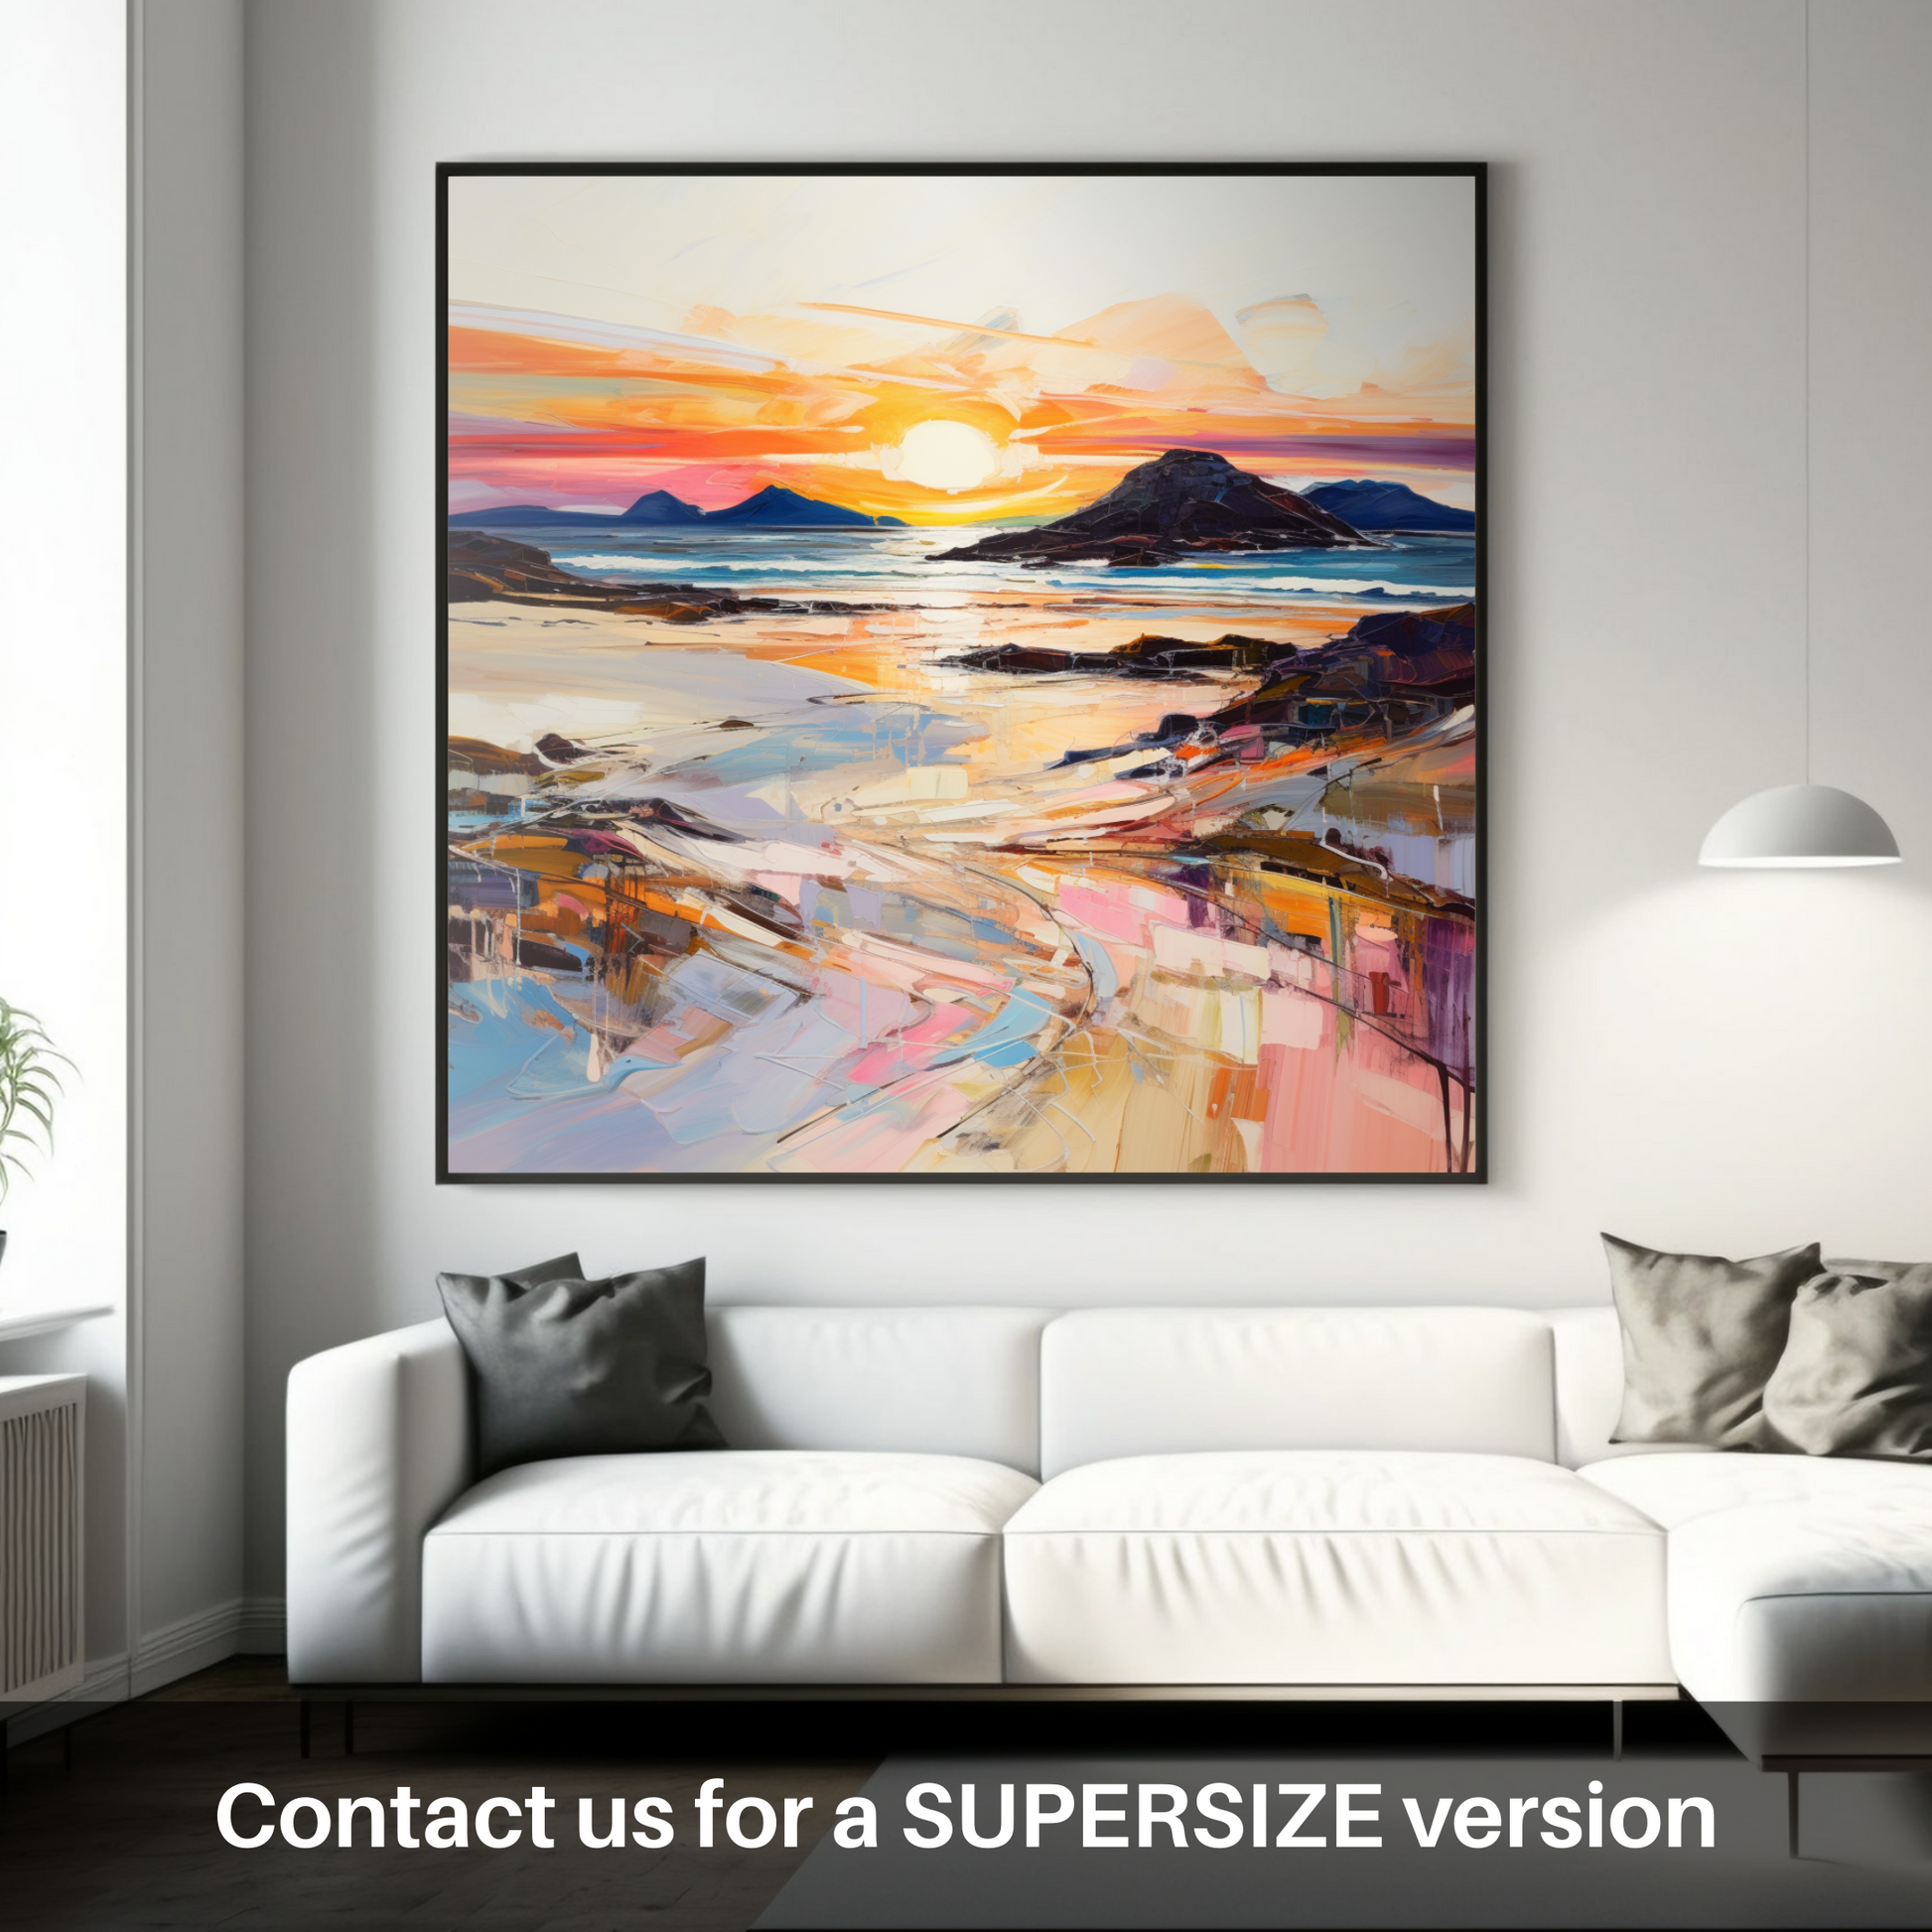 Huge supersize print of Traigh Mhor at sunset